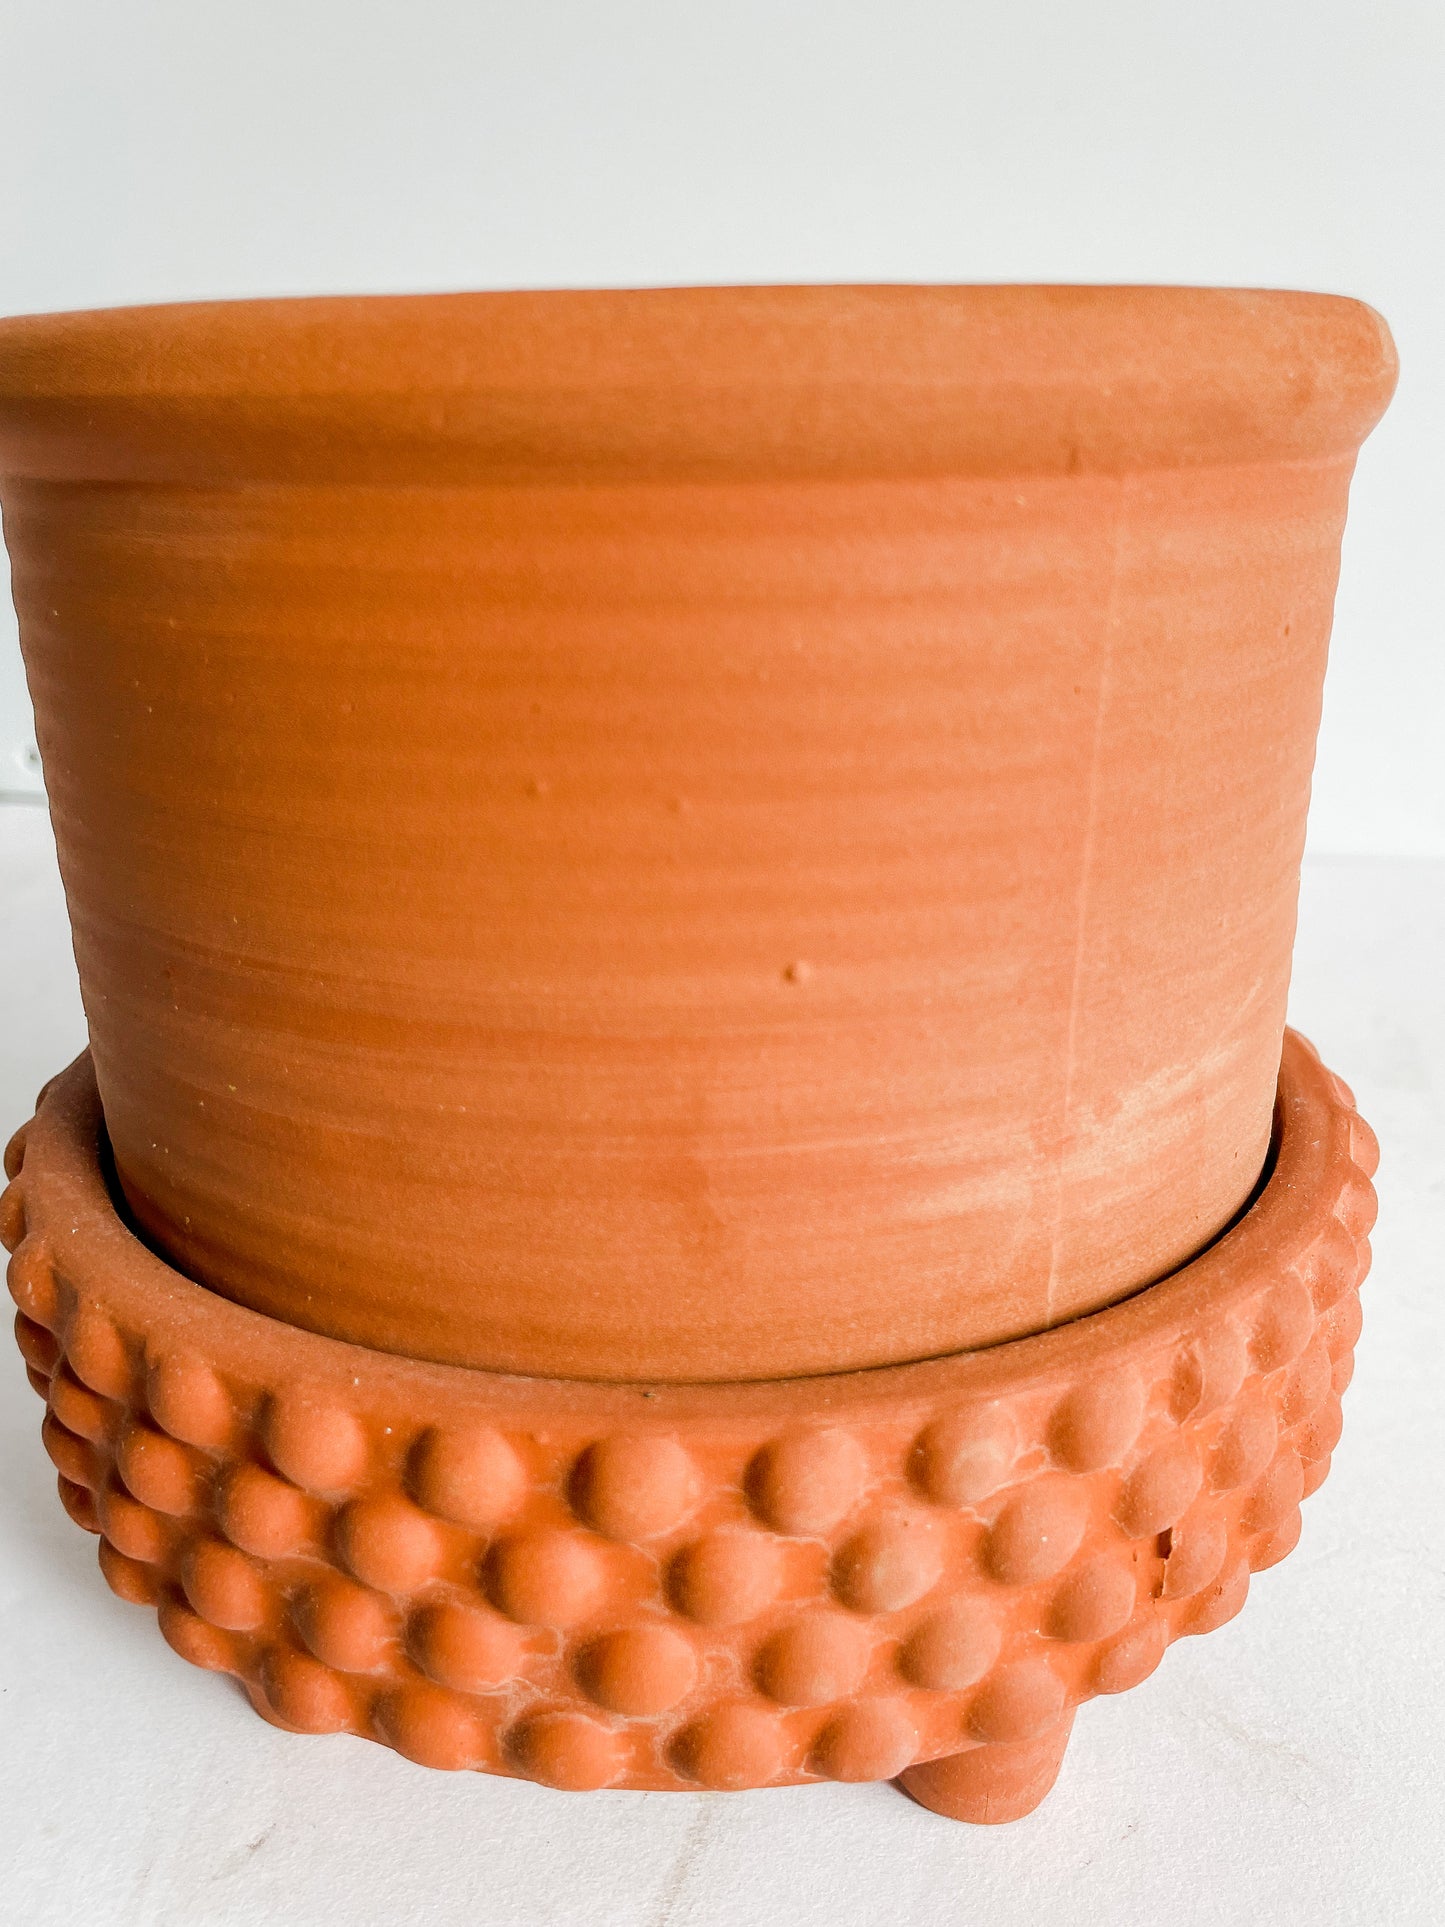 Jane Footed Pot 6.25" x 8"